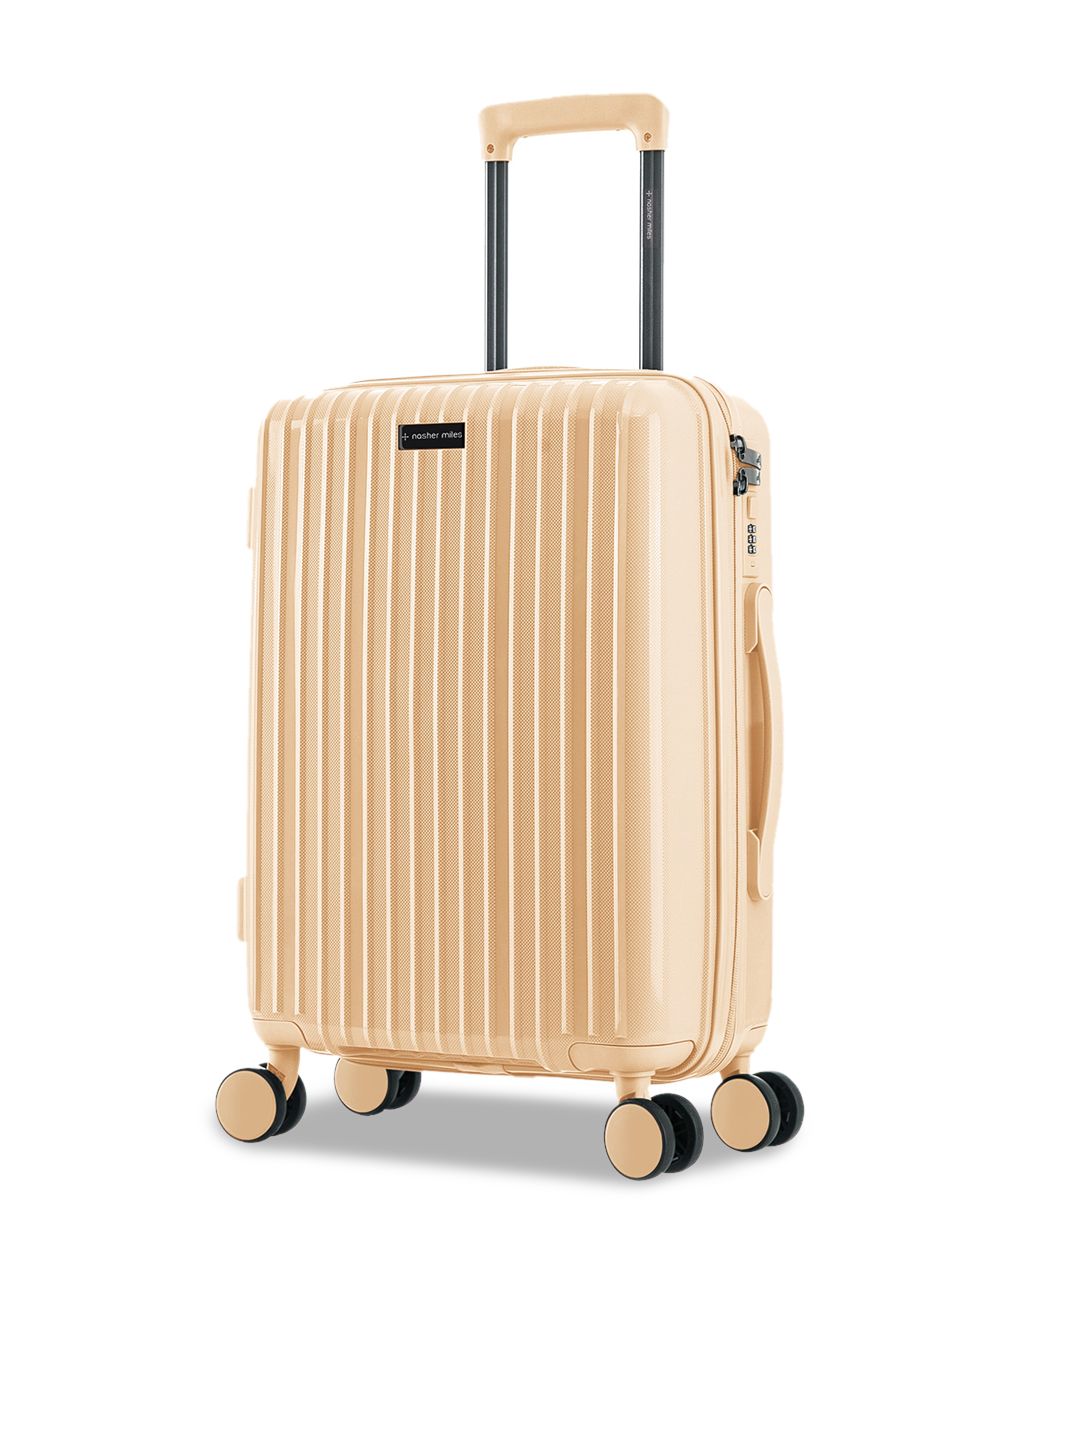 Nasher Miles Peach-Colored Textured Hard-Sided Cabin Trolley Suitcase Price in India